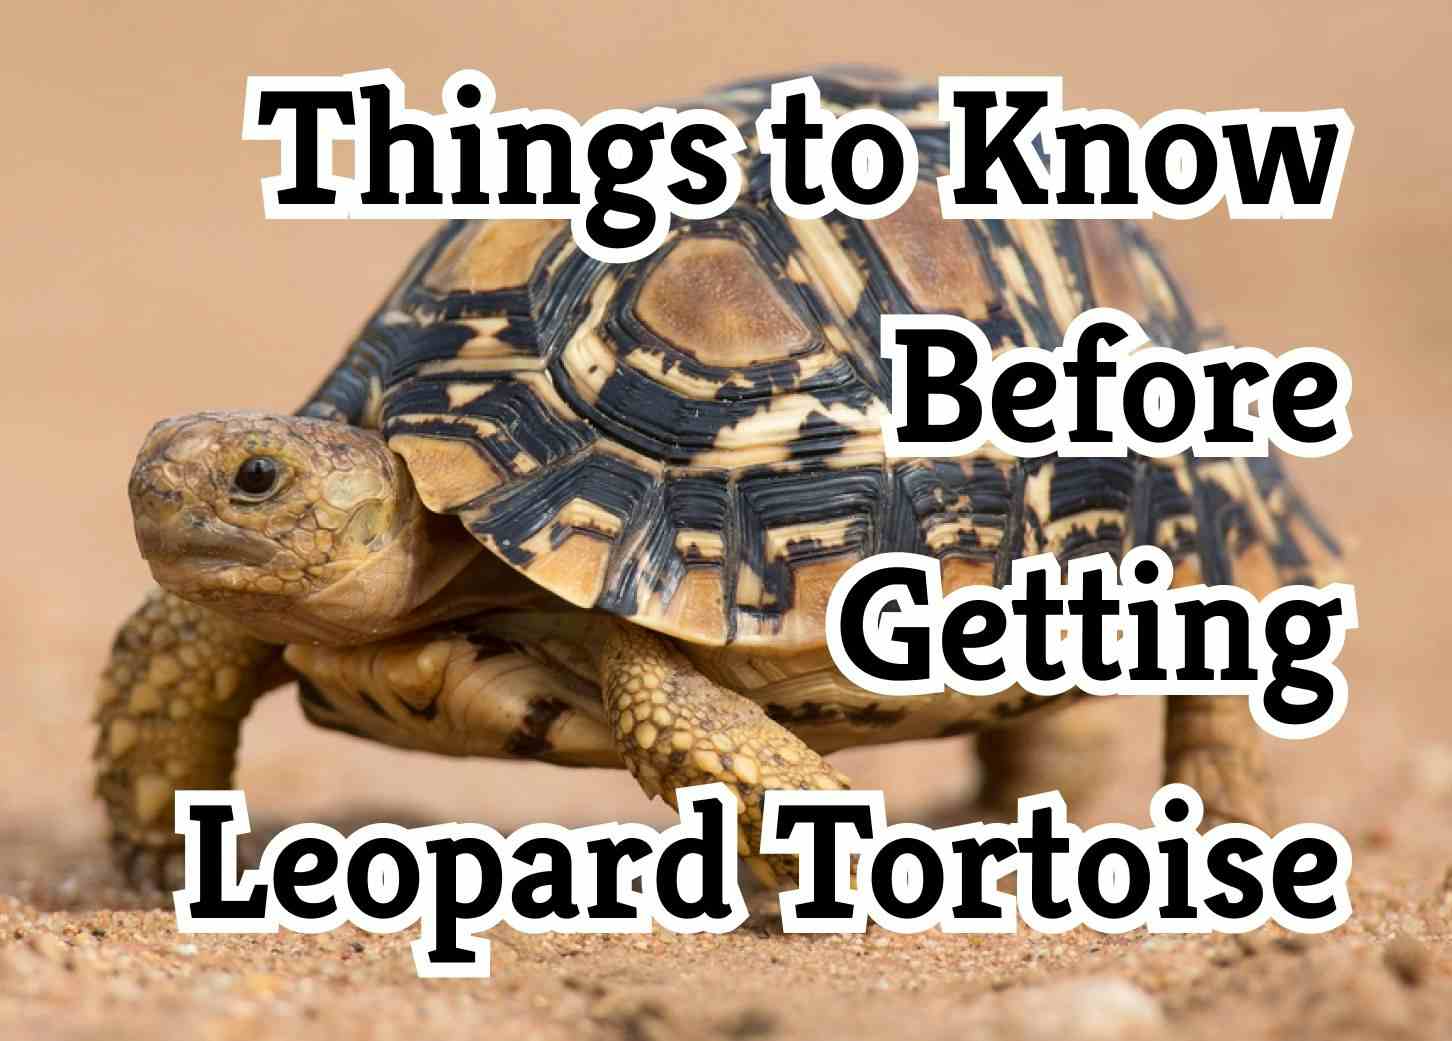 Essential Facts You Should Know About the Leopard Tortoise